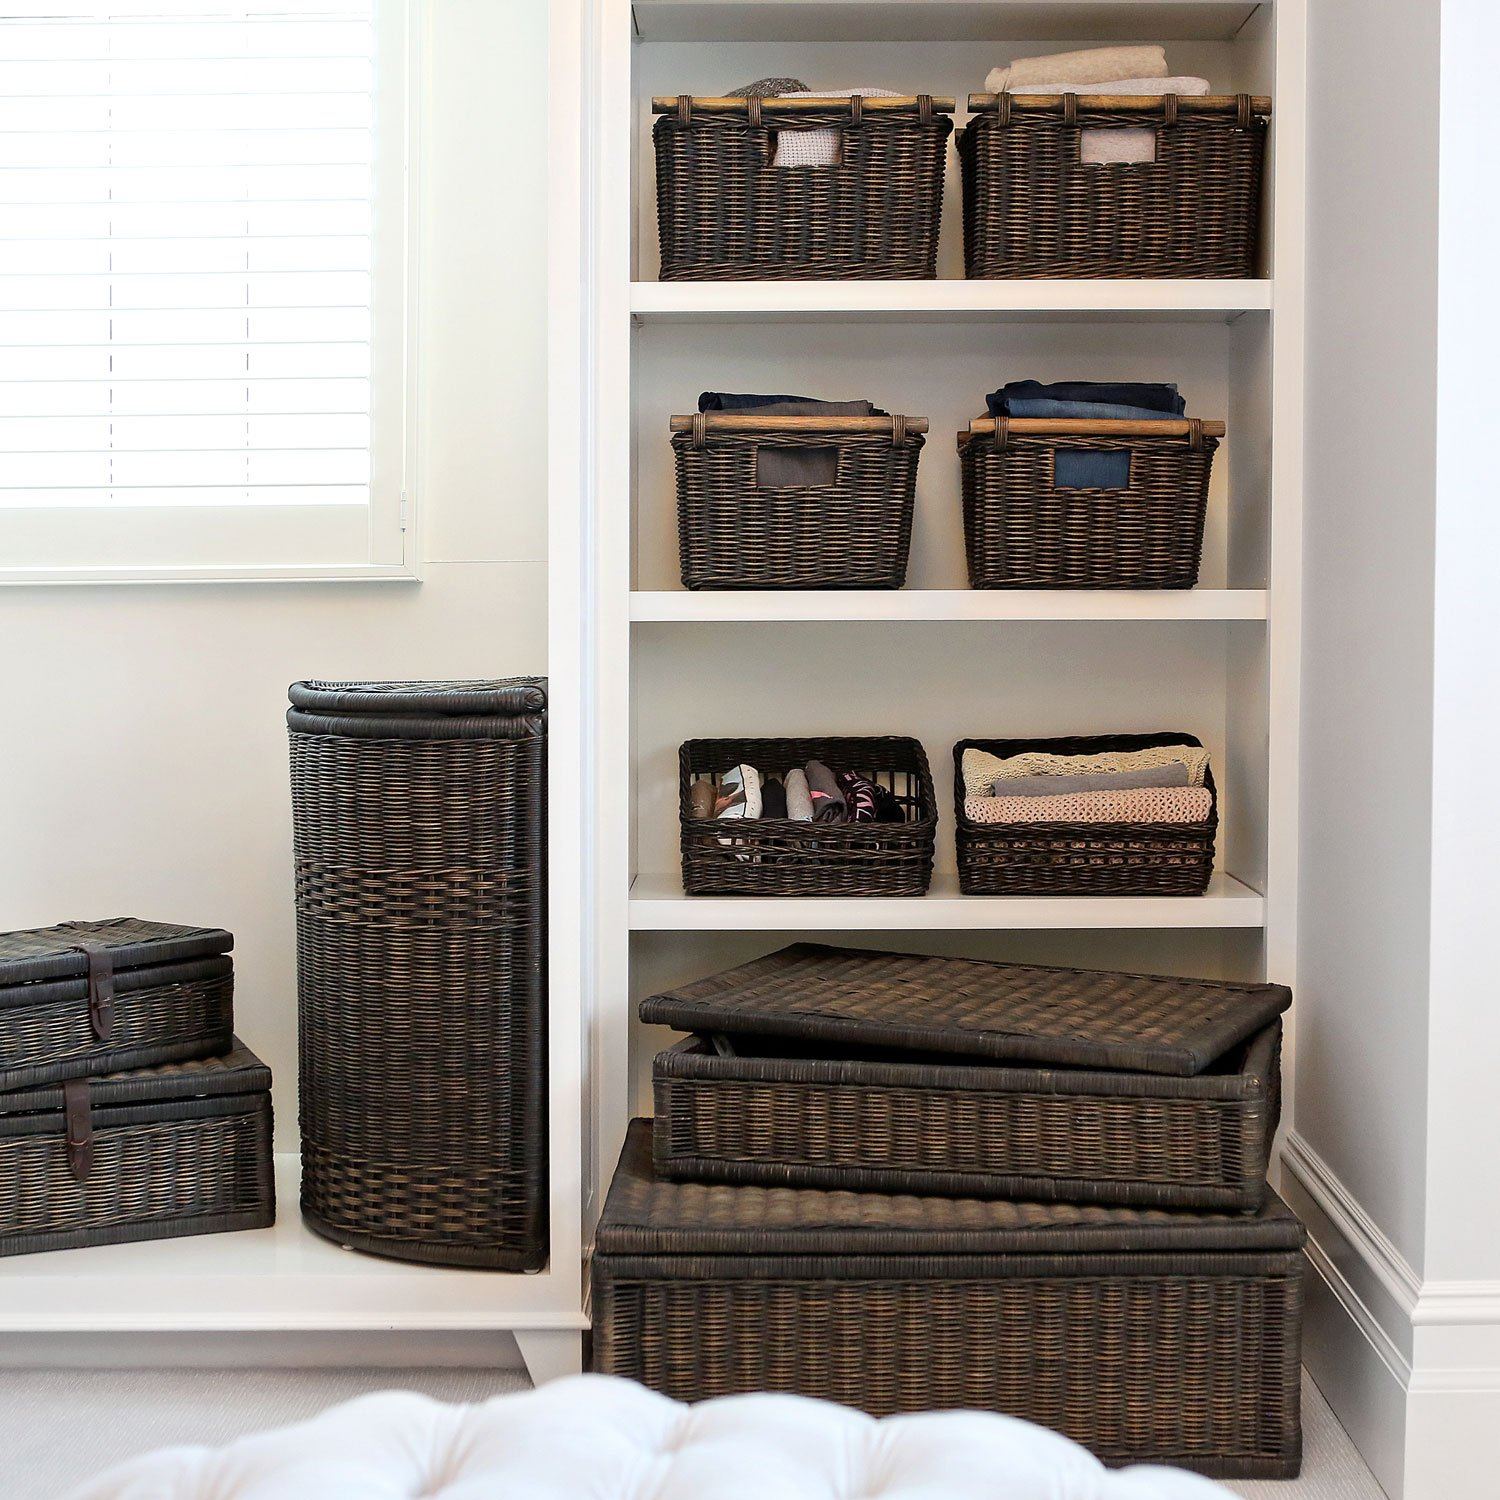 Wicker Storage Baskets For Shelves Closets The Basket Lady